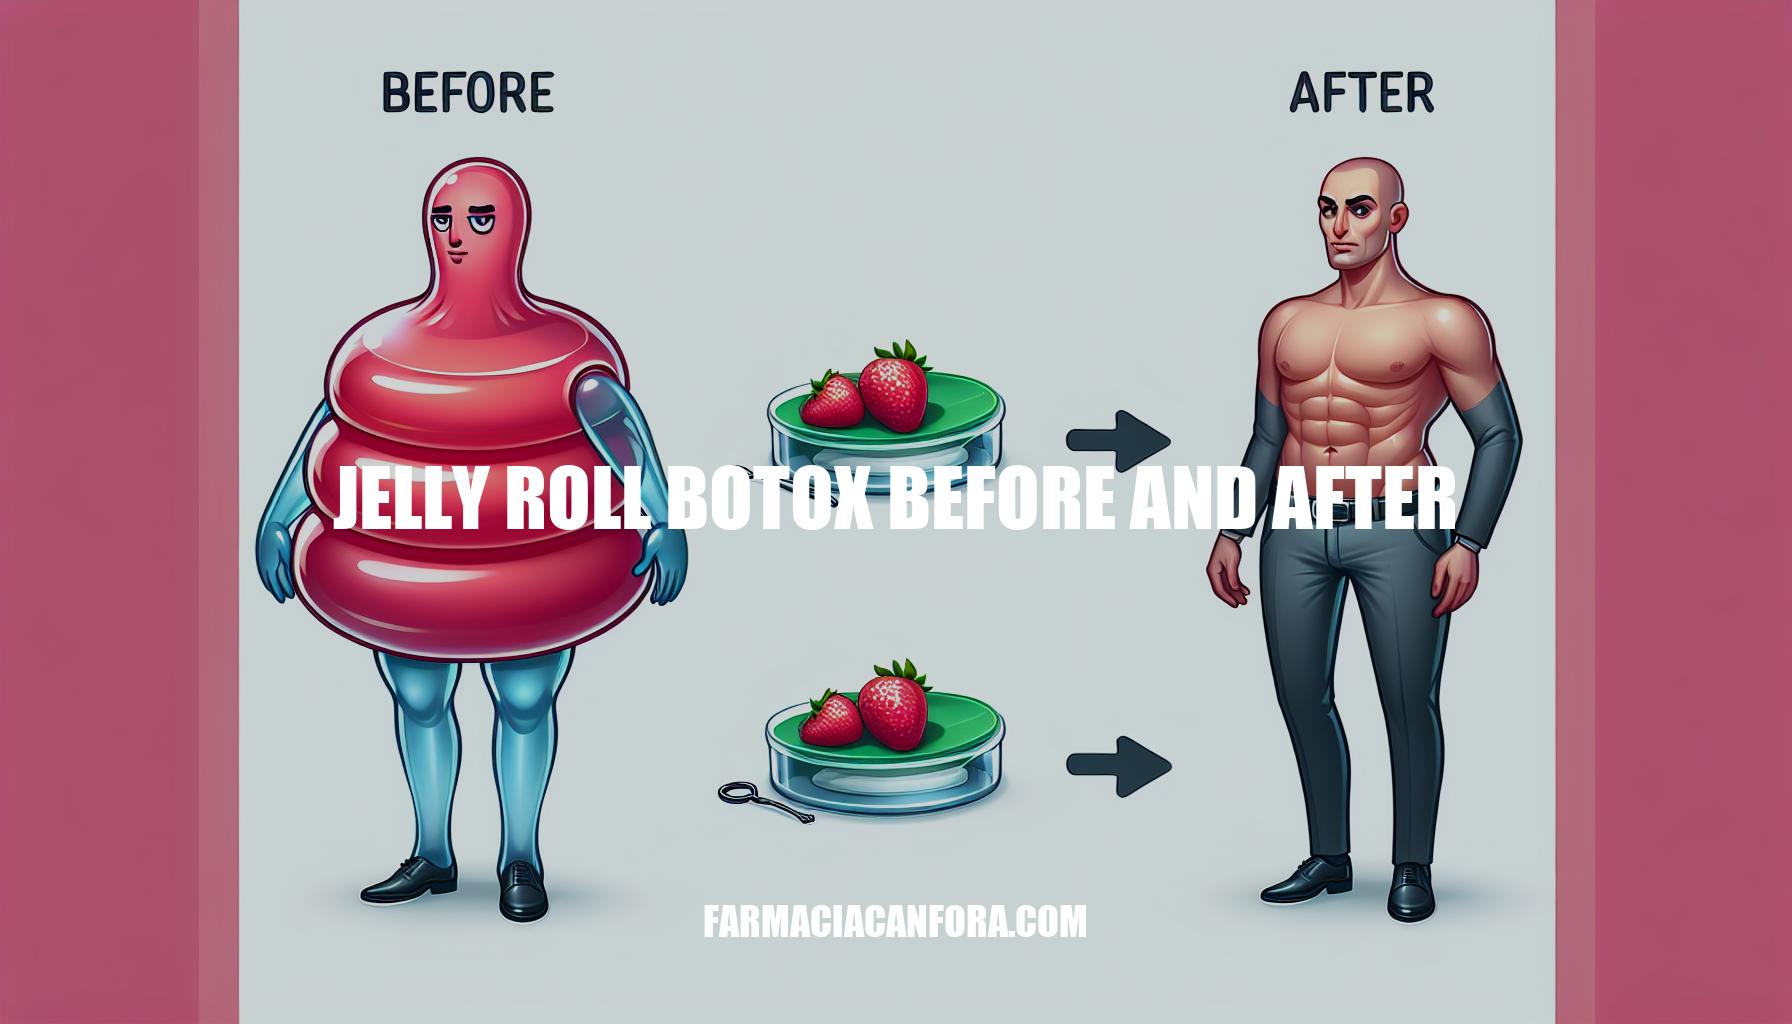 Jelly Roll Botox Before and After: A Comprehensive Guide